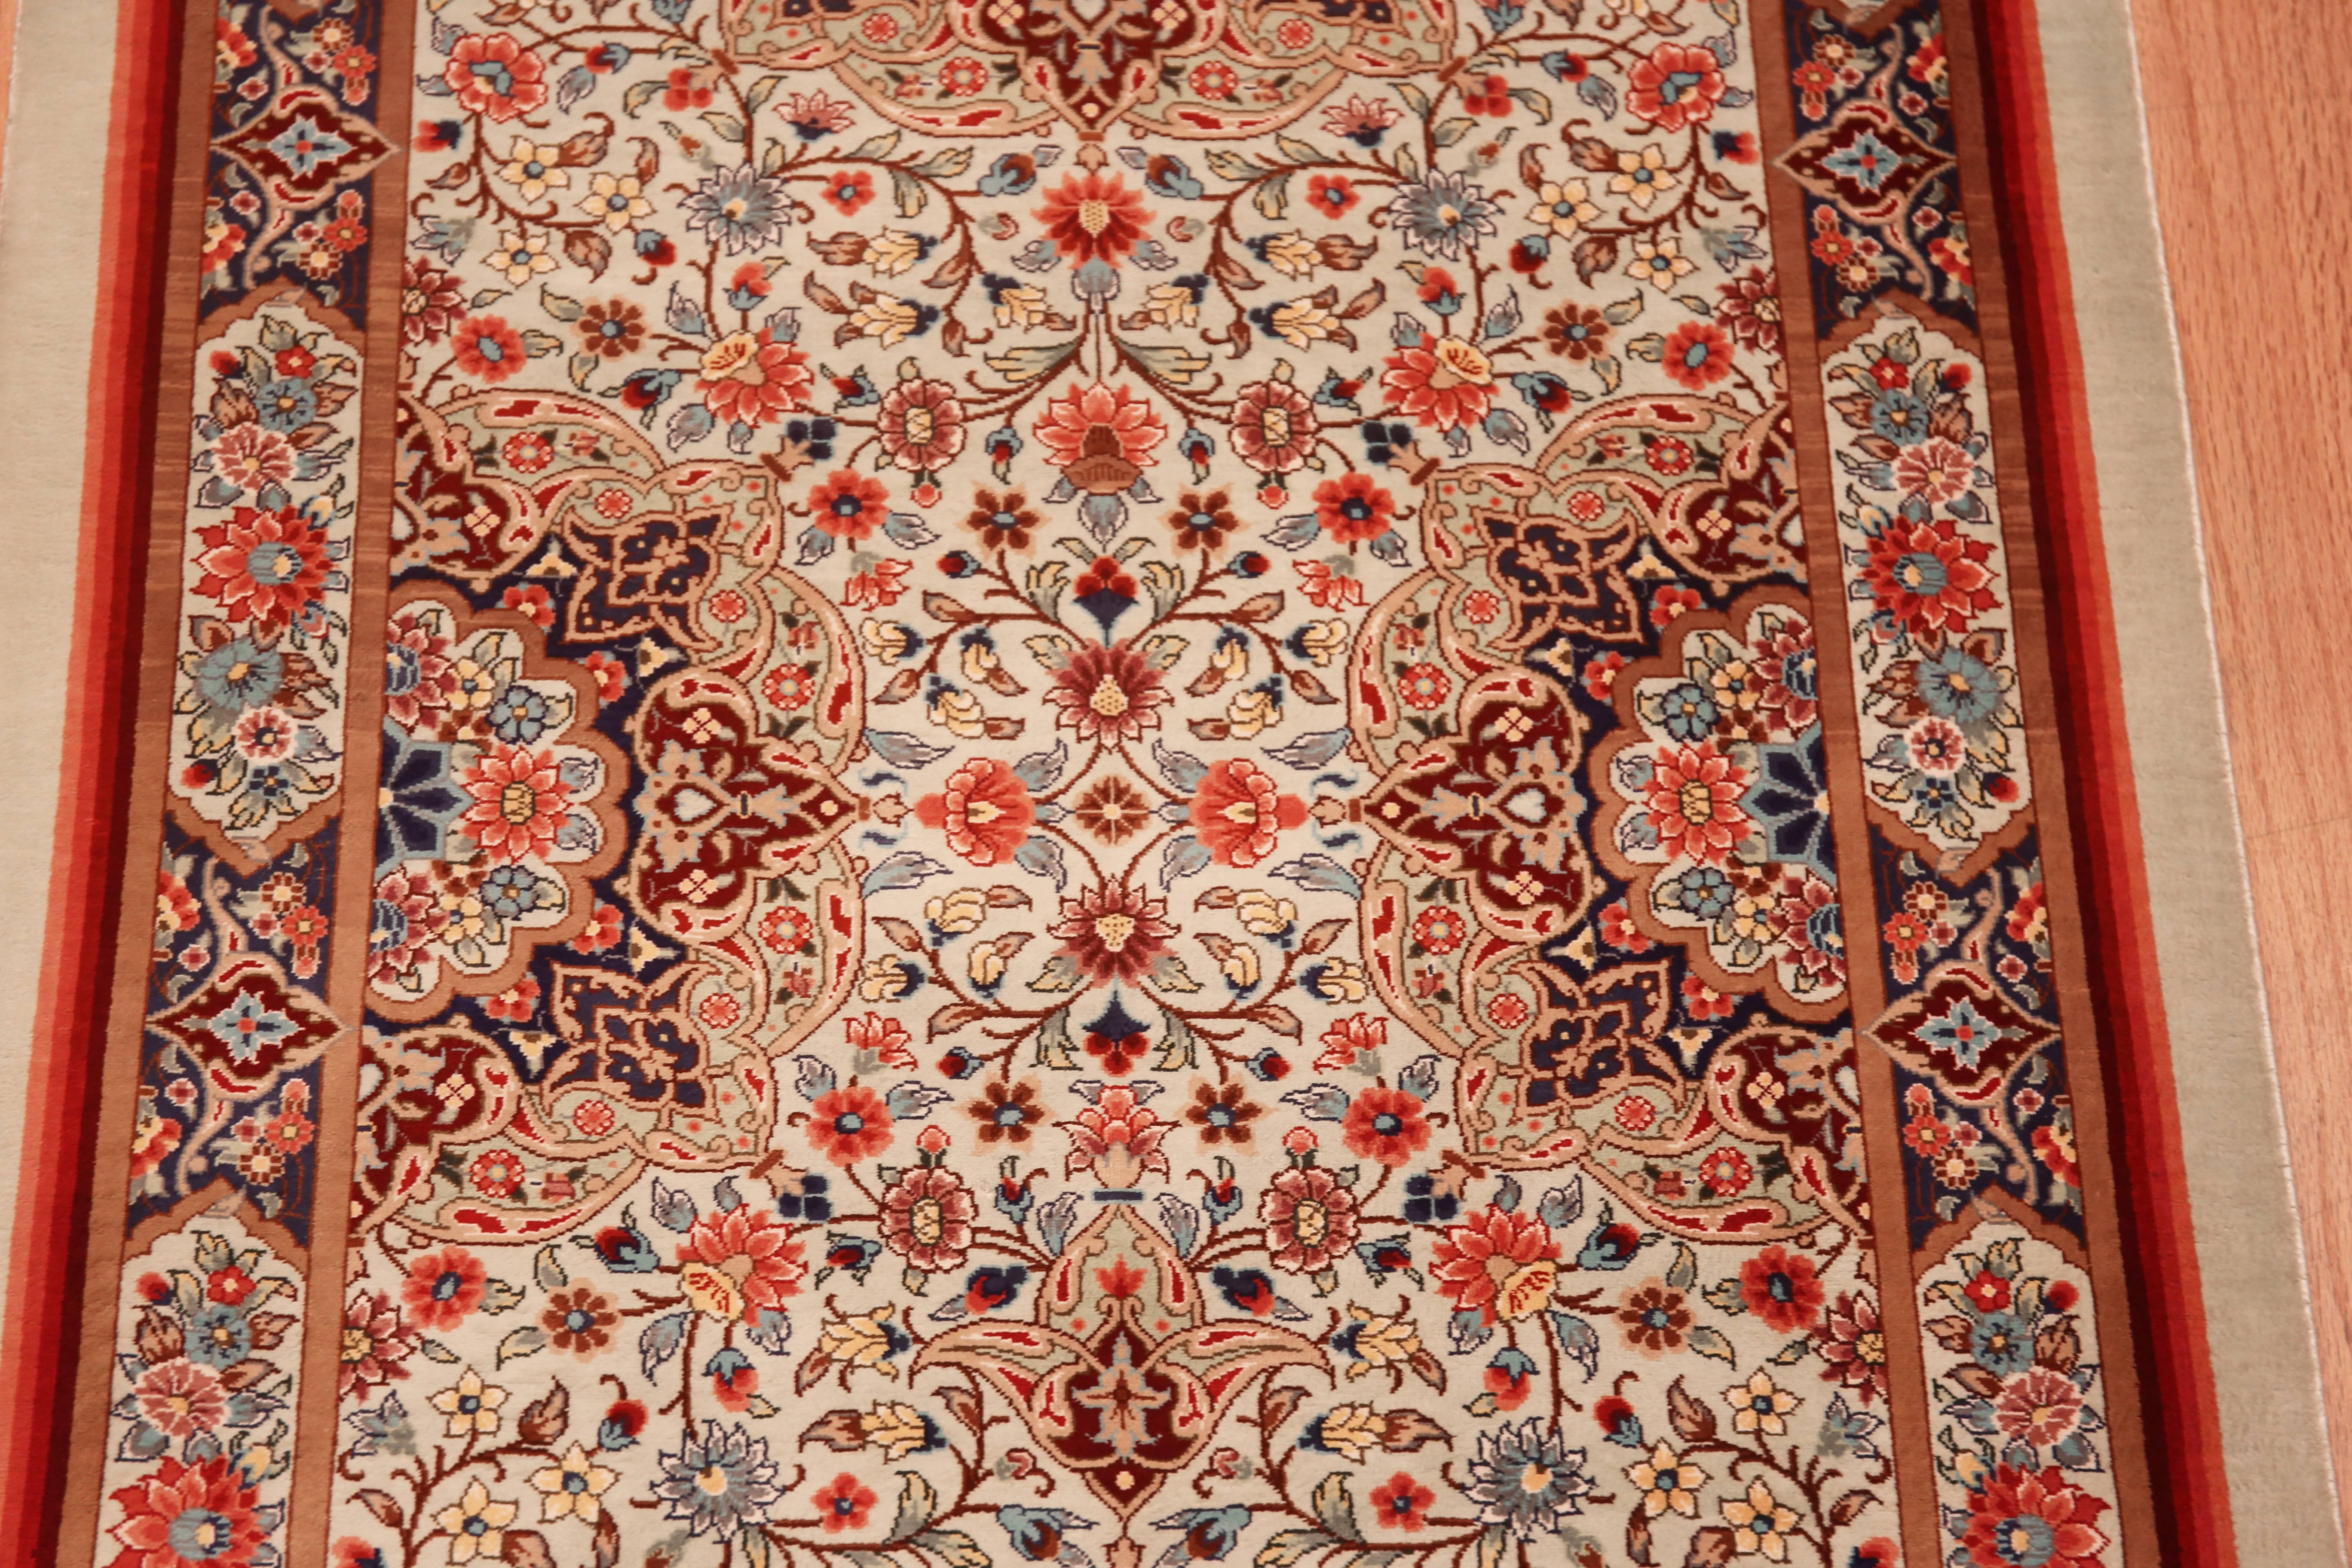 Hand-Knotted Fine Luxurious Silk Pile Floral Vintage Persian Qum Short Runner Rug 2'2